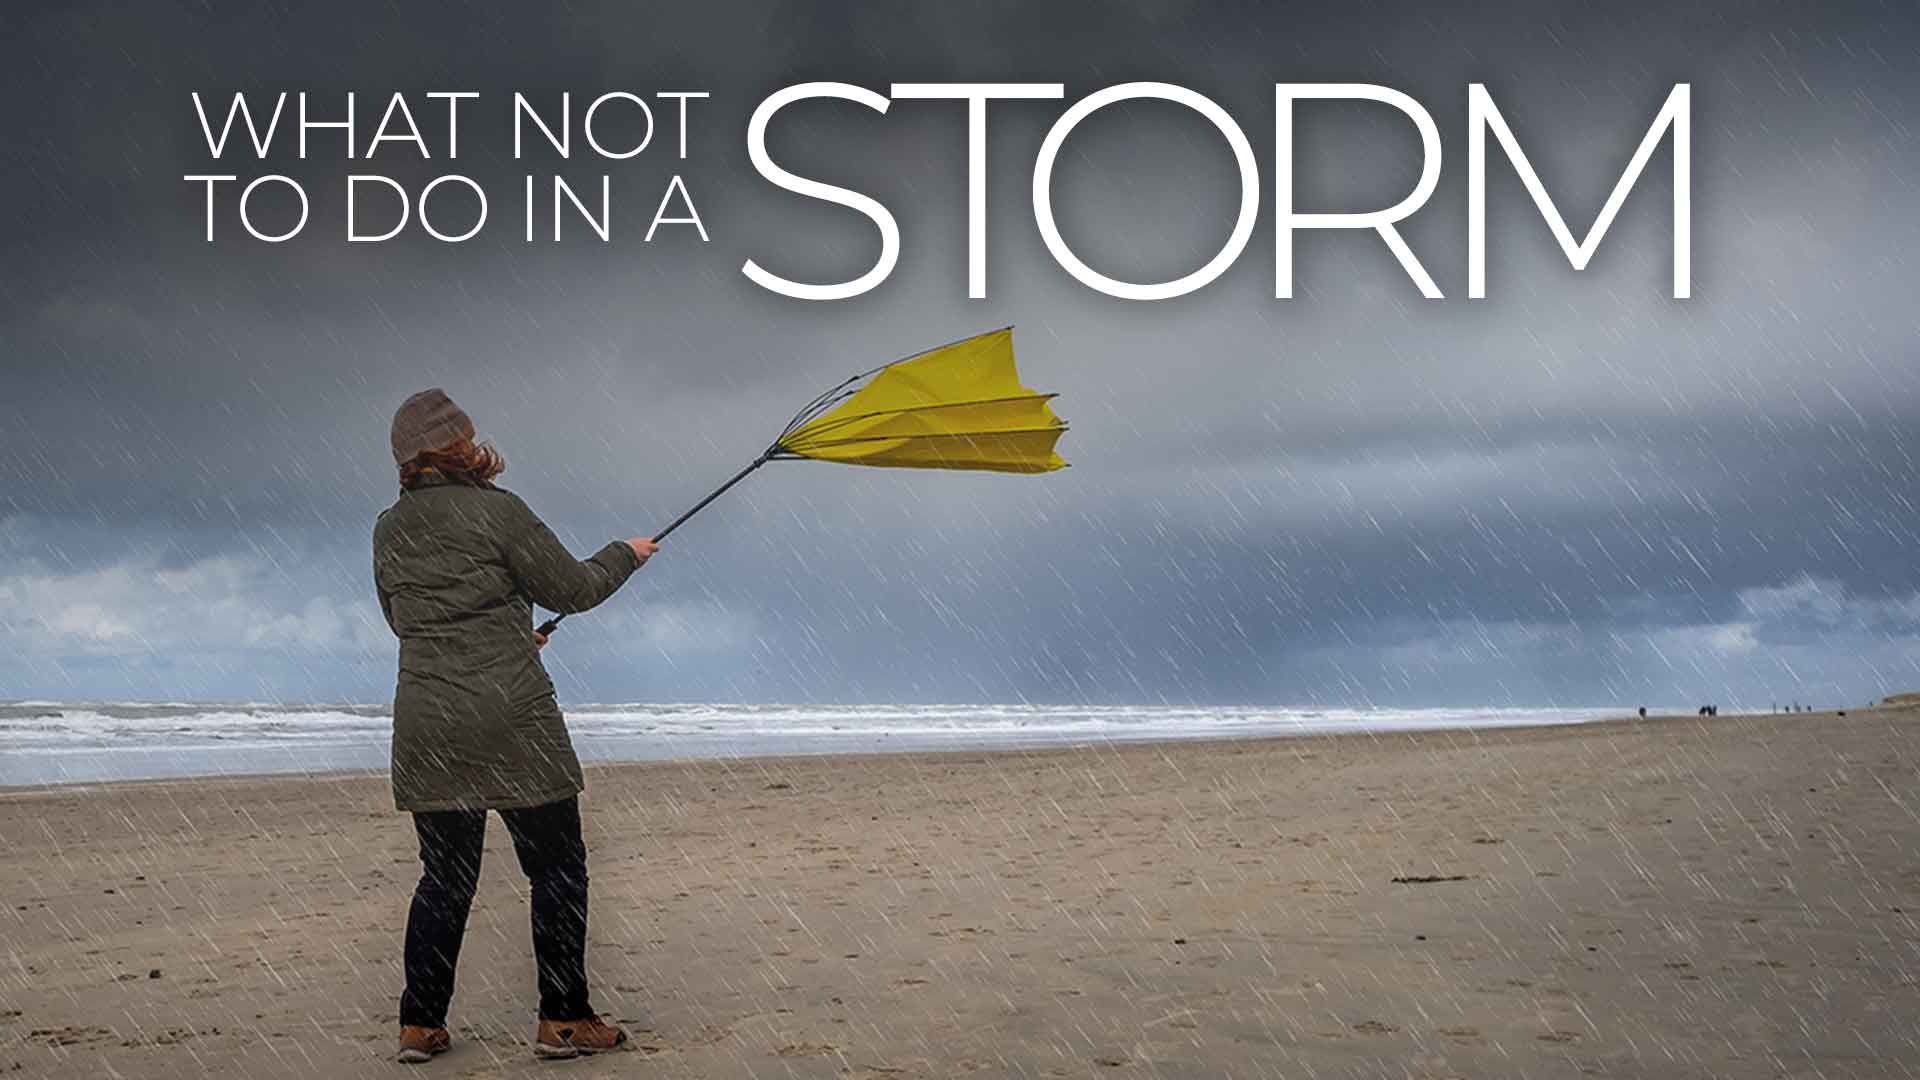 What Not to Do in a Storm 1920x1080